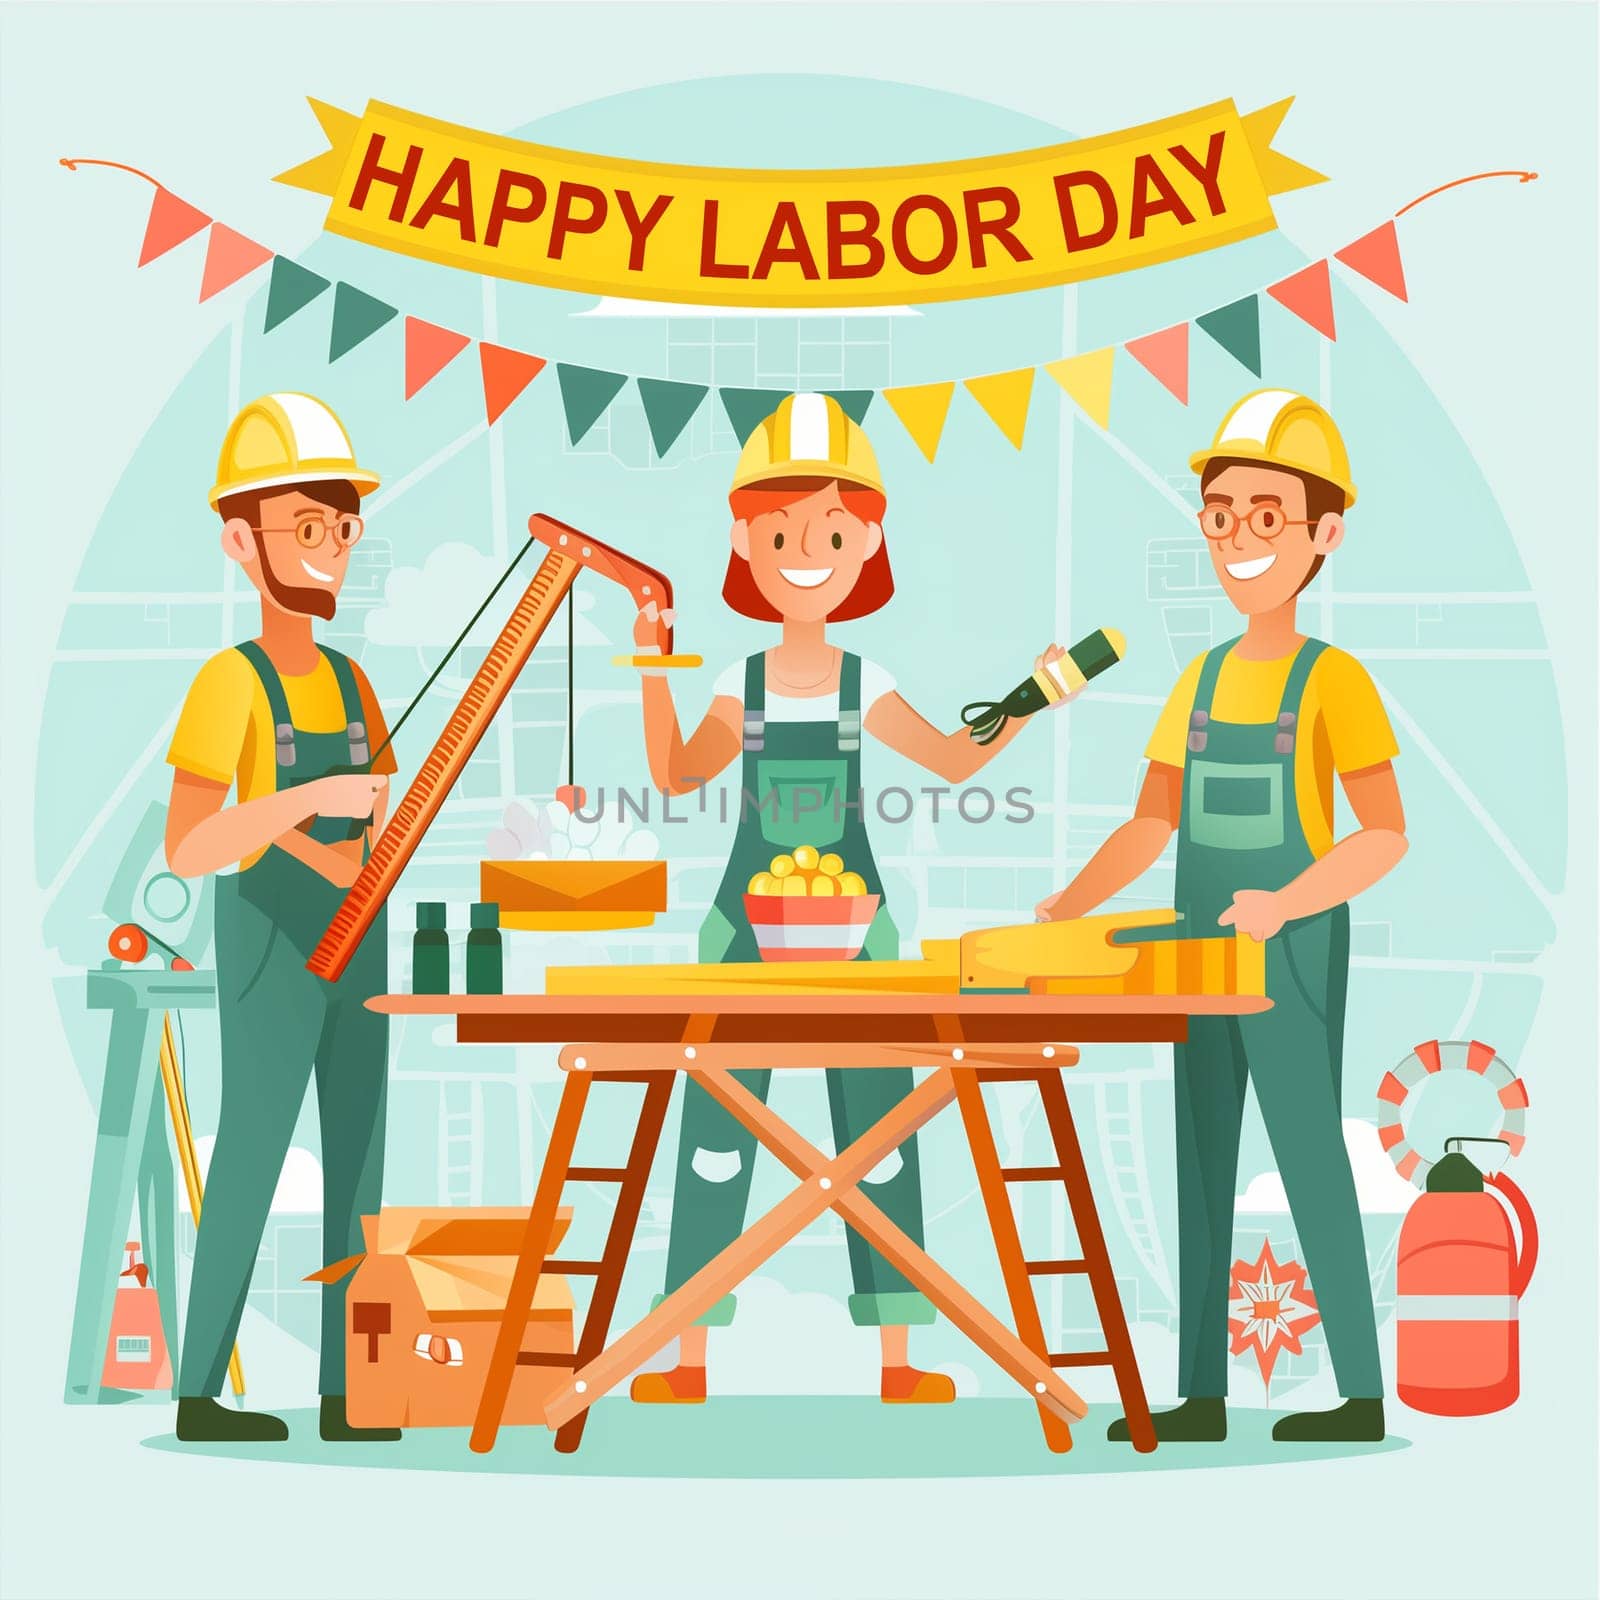 Celebrating Labor Day With a Joyful Illustration of Three Workers Engaged in Festive Activities by Sd28DimoN_1976